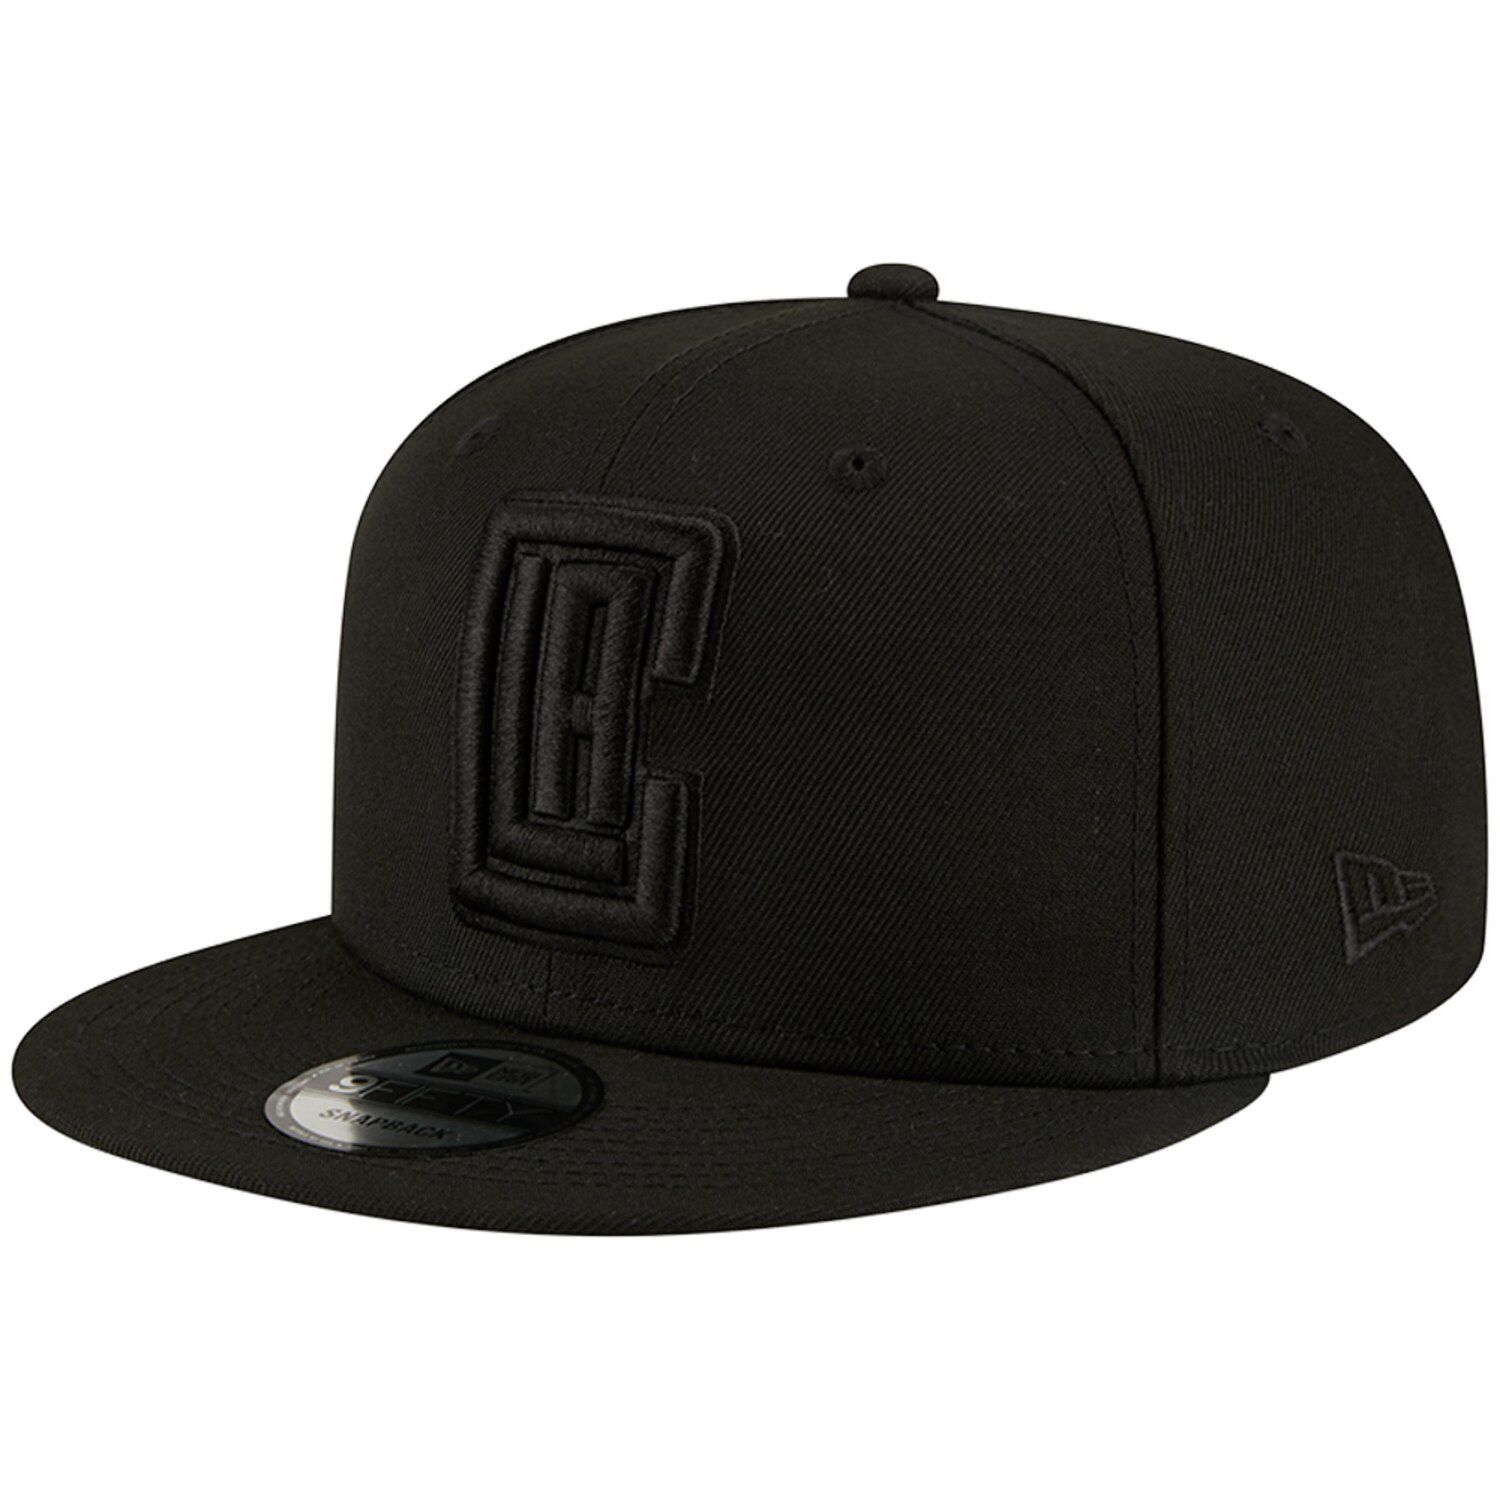 Мужская кепка New Era LA Clippers Black On Black 9FIFTY Snapback electric hair clippers oil head hair clippers razor haircut push carving professional hairdressing hair clippers